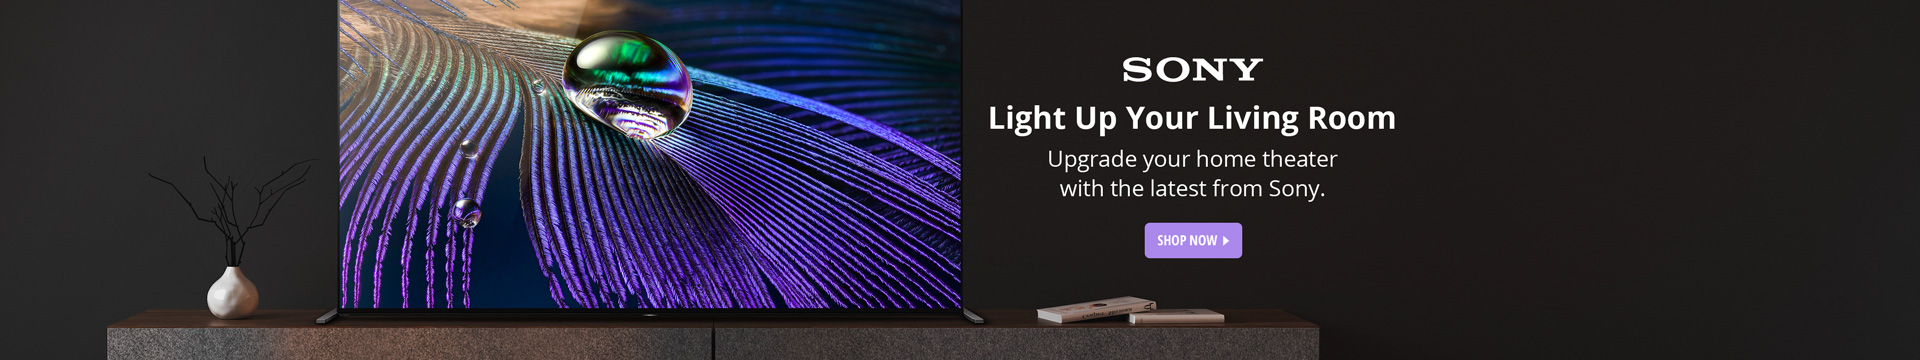 Sony Light Up Your Living Room